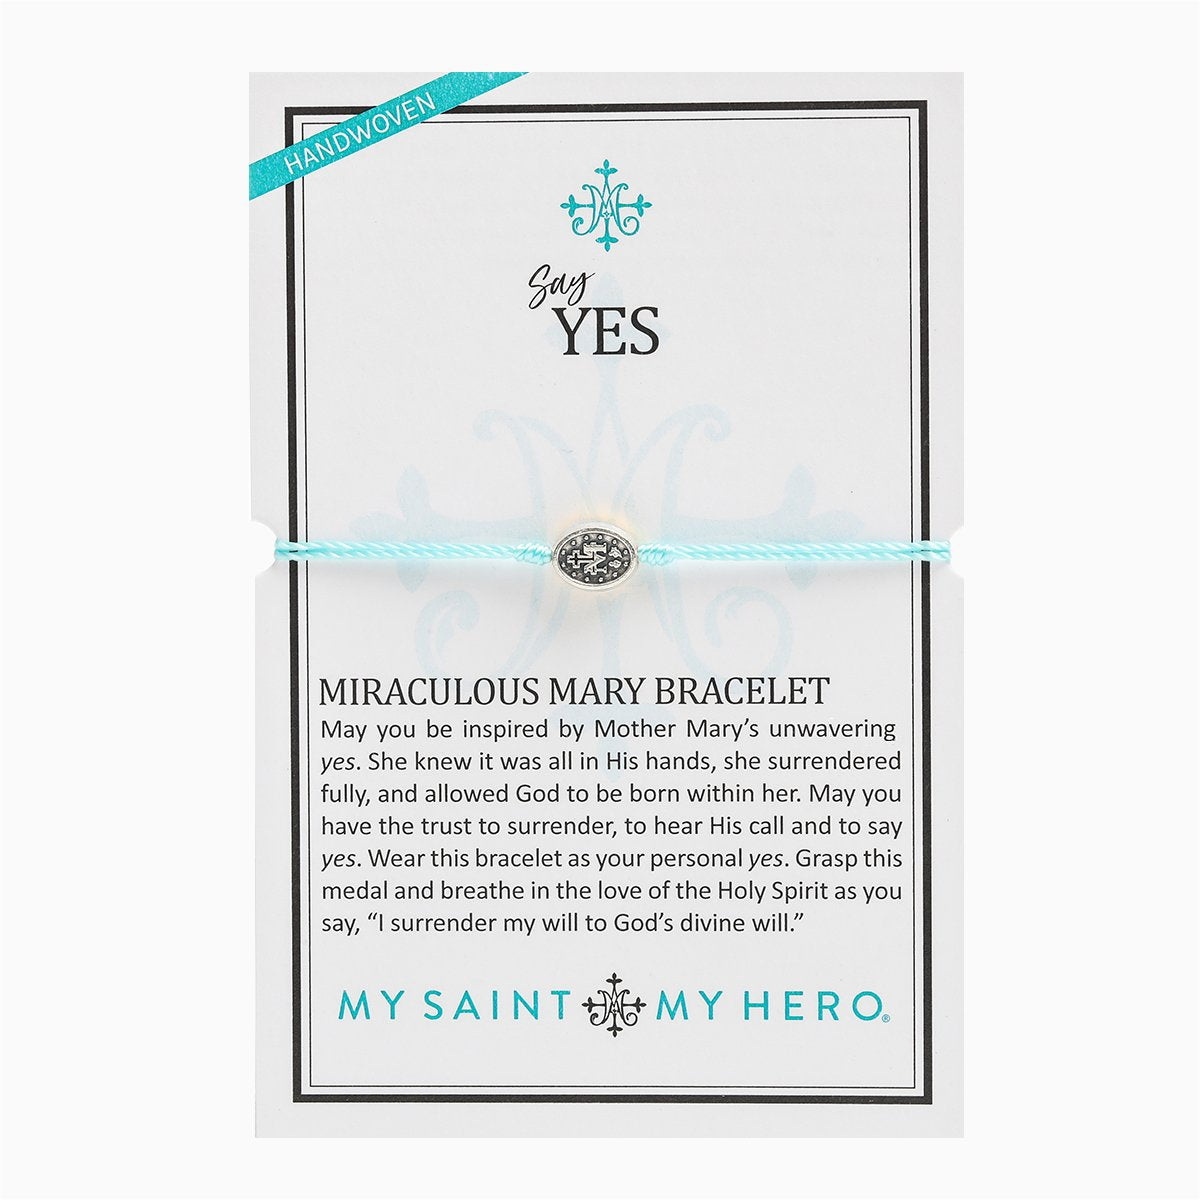 Say Yes Miraculous Mary Bracelet - Silver-Tone Medal on Mint Green Cord